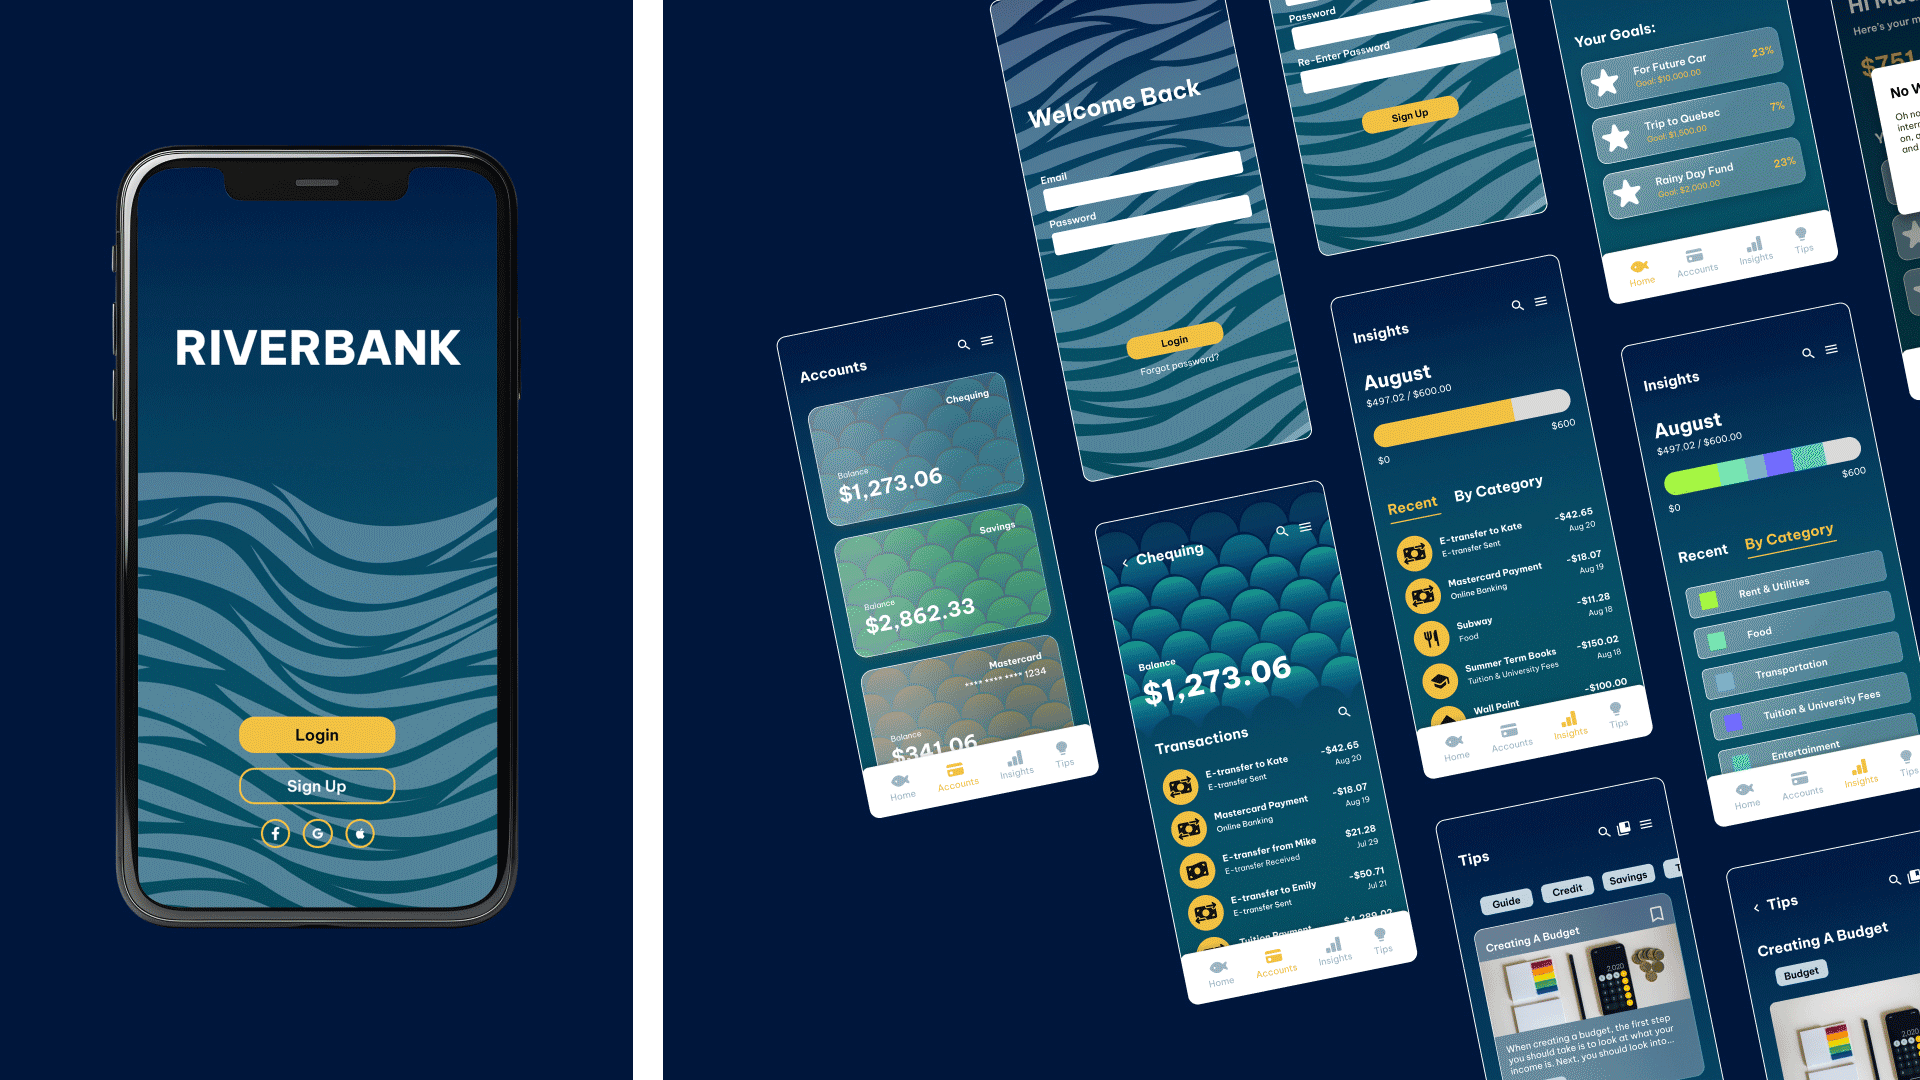 A gif of moving waves on the Riverbank app launch screen on the left and static images of various internal screens of Riverbank on the right.